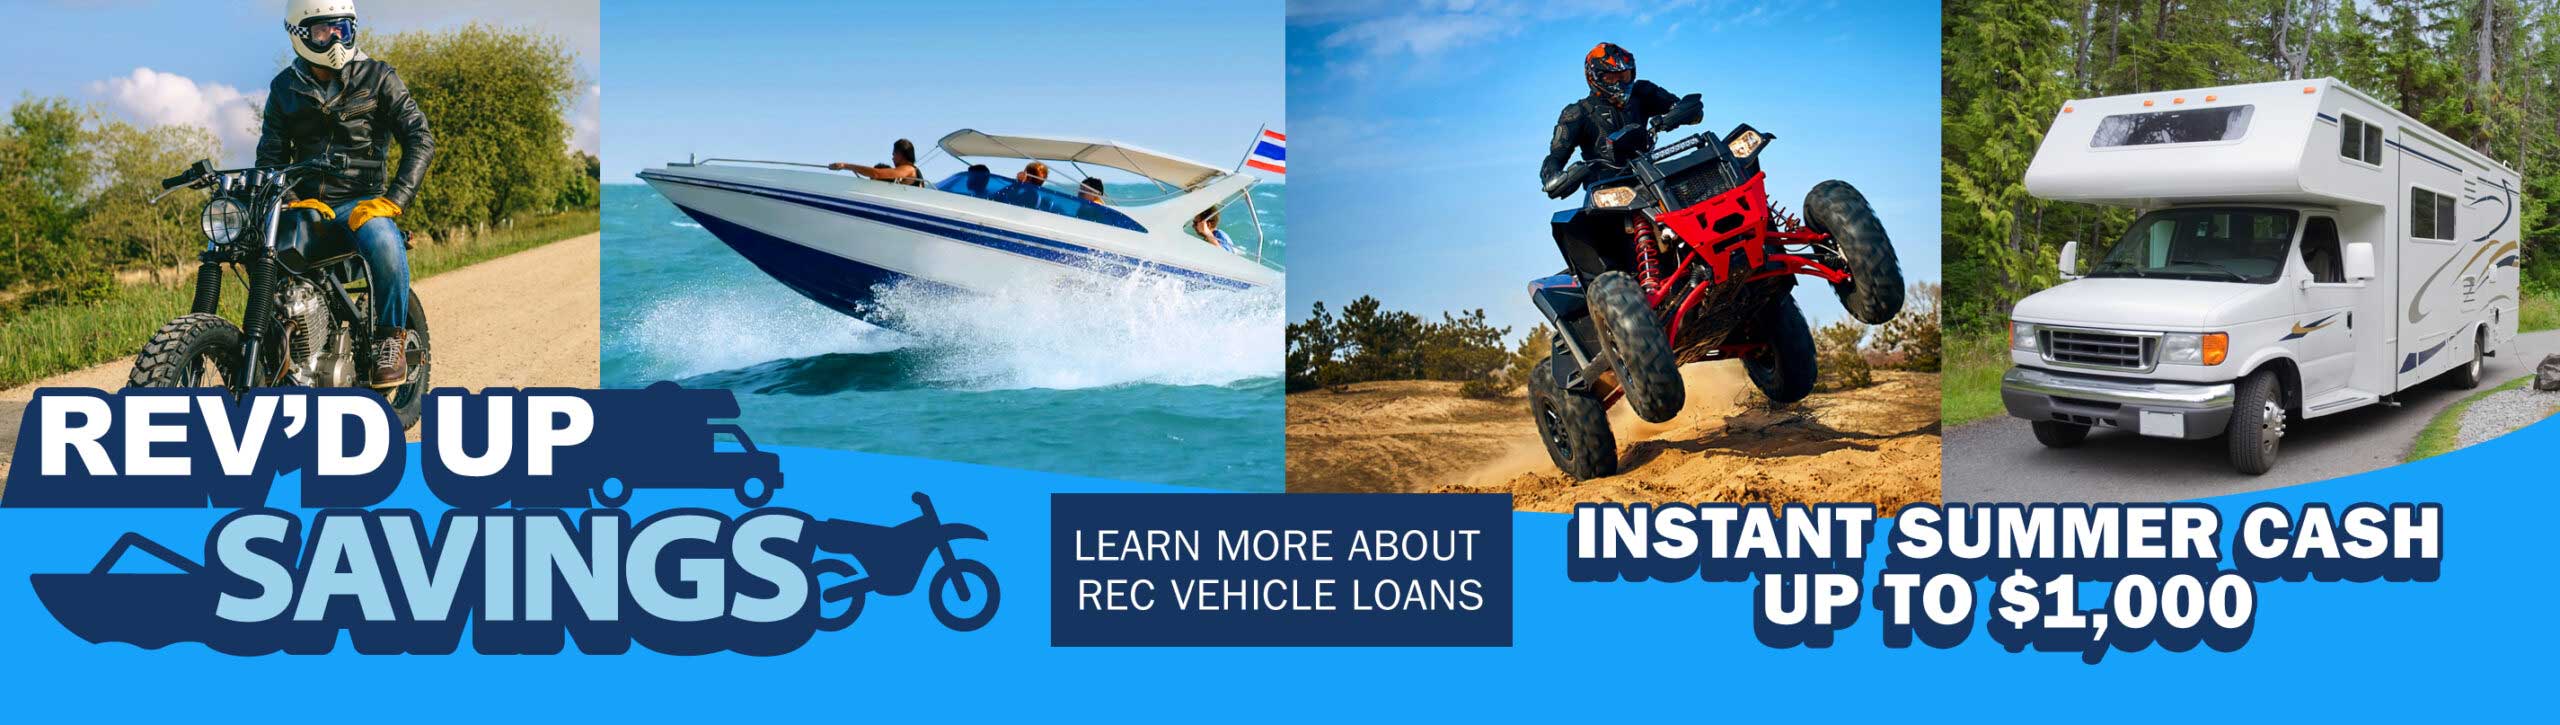 Rev'd up savings. Learn More about Recreational Vehicle Loans. Instant Summer Cash up to $1,000*